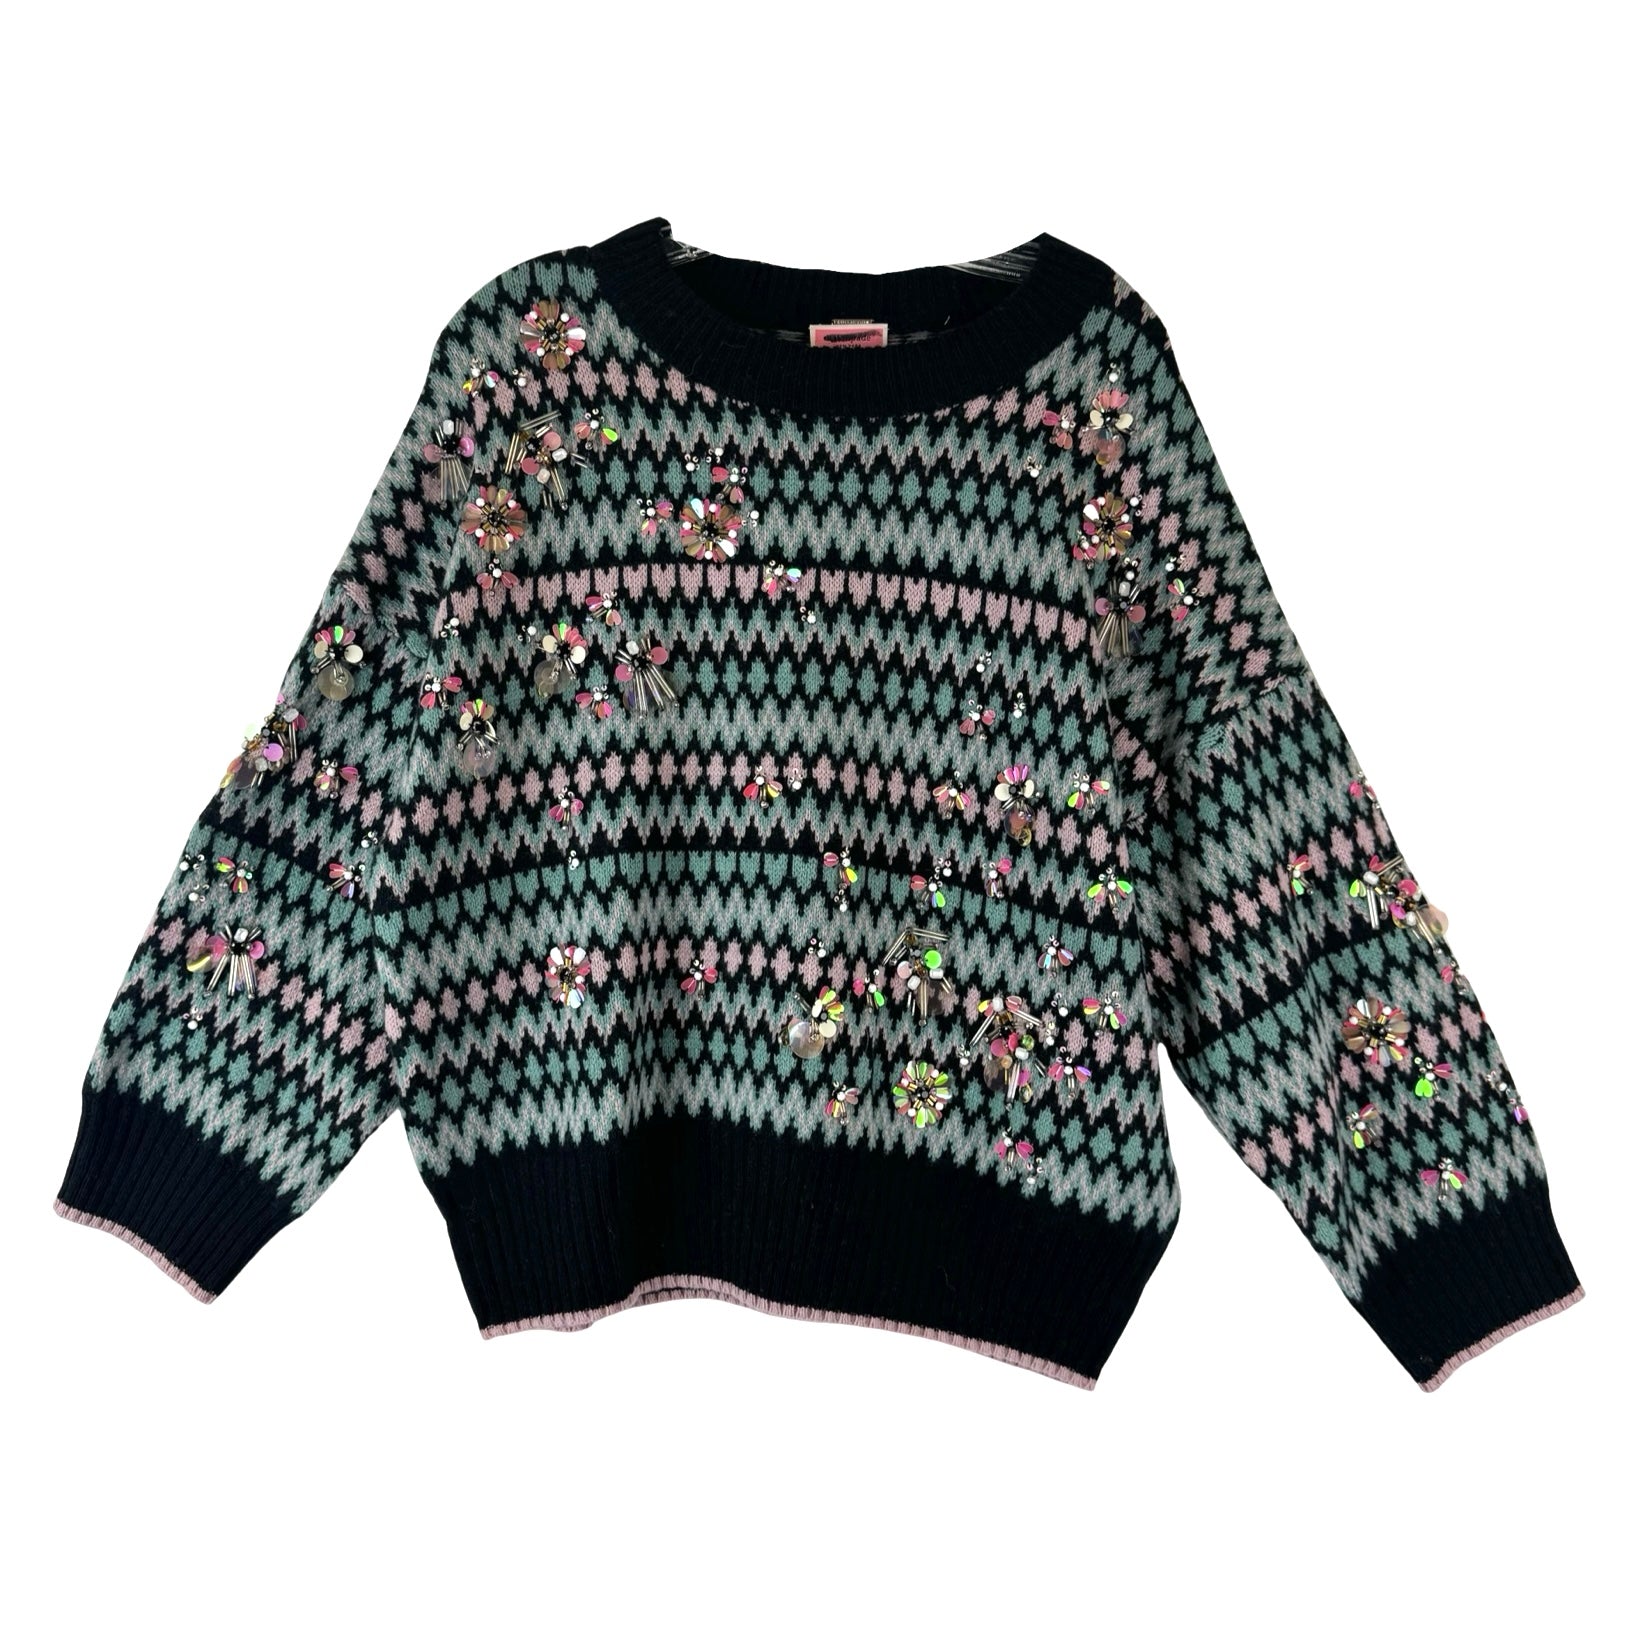 Kate Spade Sequin and Bead Embellished Fair Isle Sweater